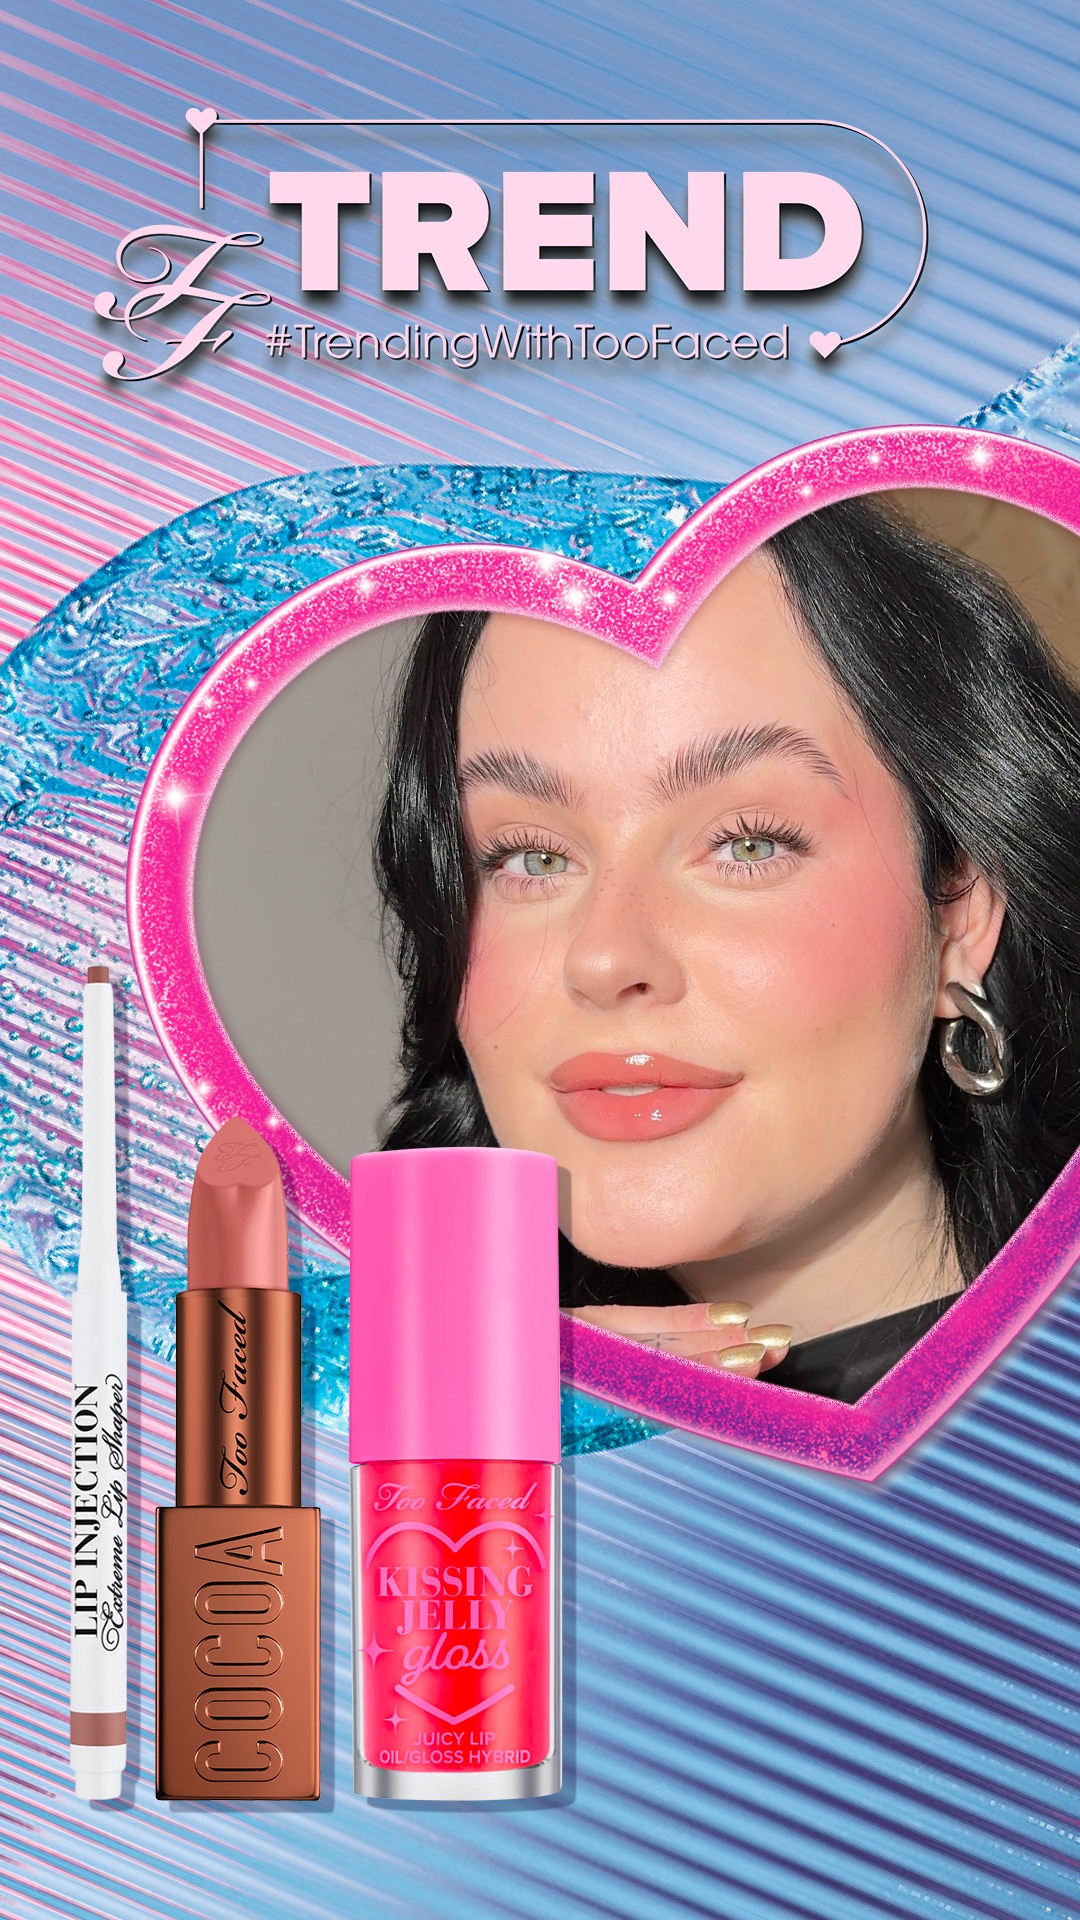 isabelle kate jelly lips makeup tutrial video 